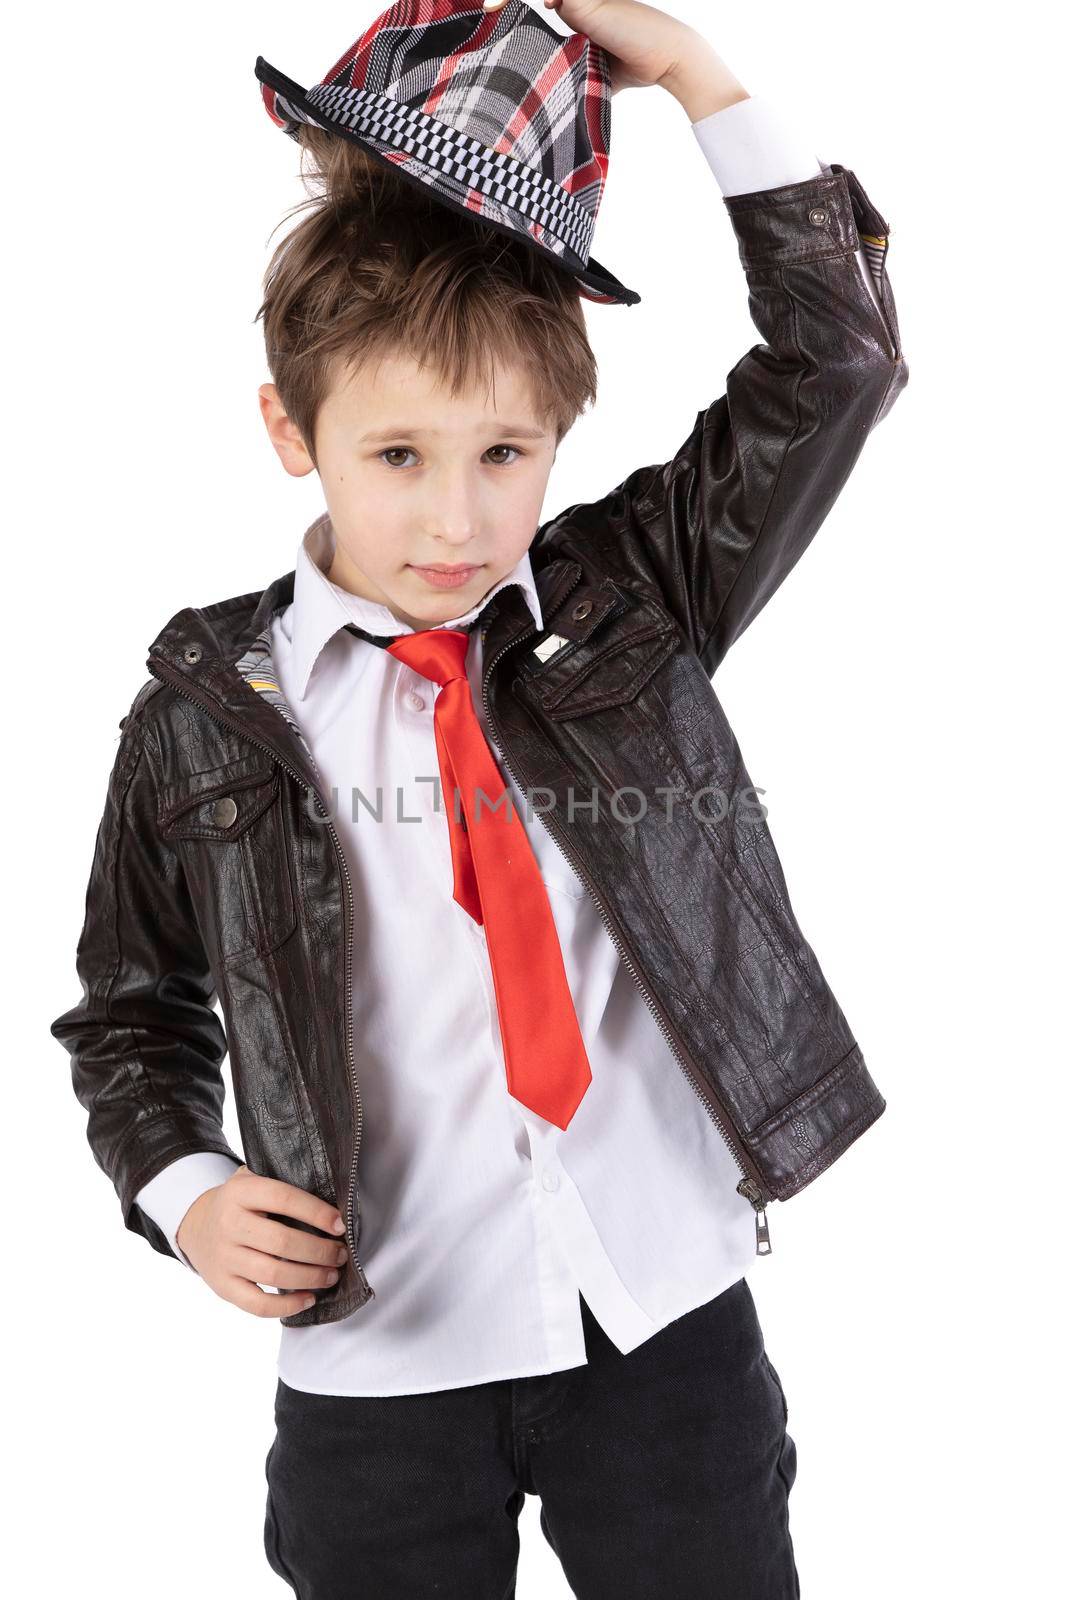 Funny little boy in a leather jacket, elegant hat and red tie. Red child on a white background. Seven year old boy. Take off your hat. by Sviatlana